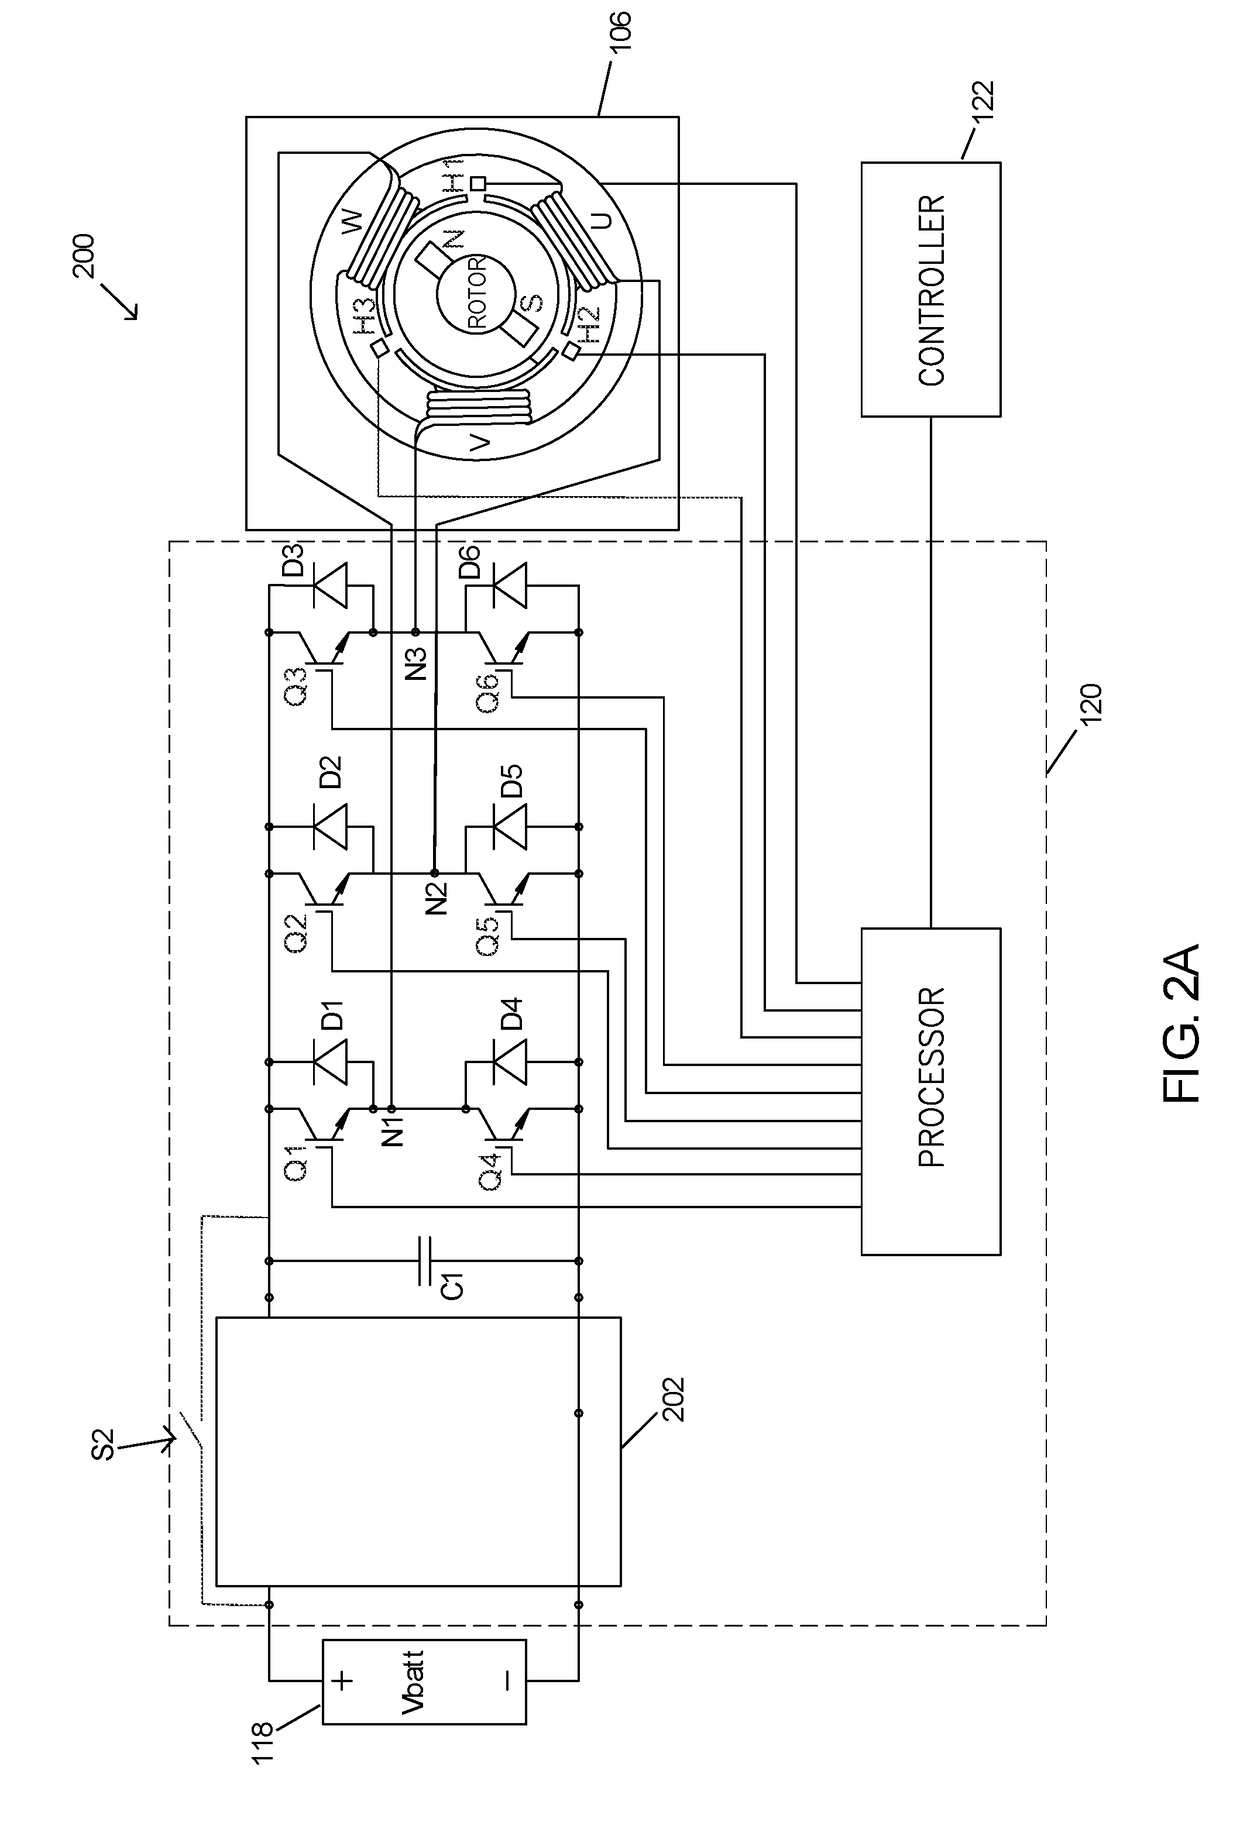 Method and system for improving the efficiency of motor vehicles